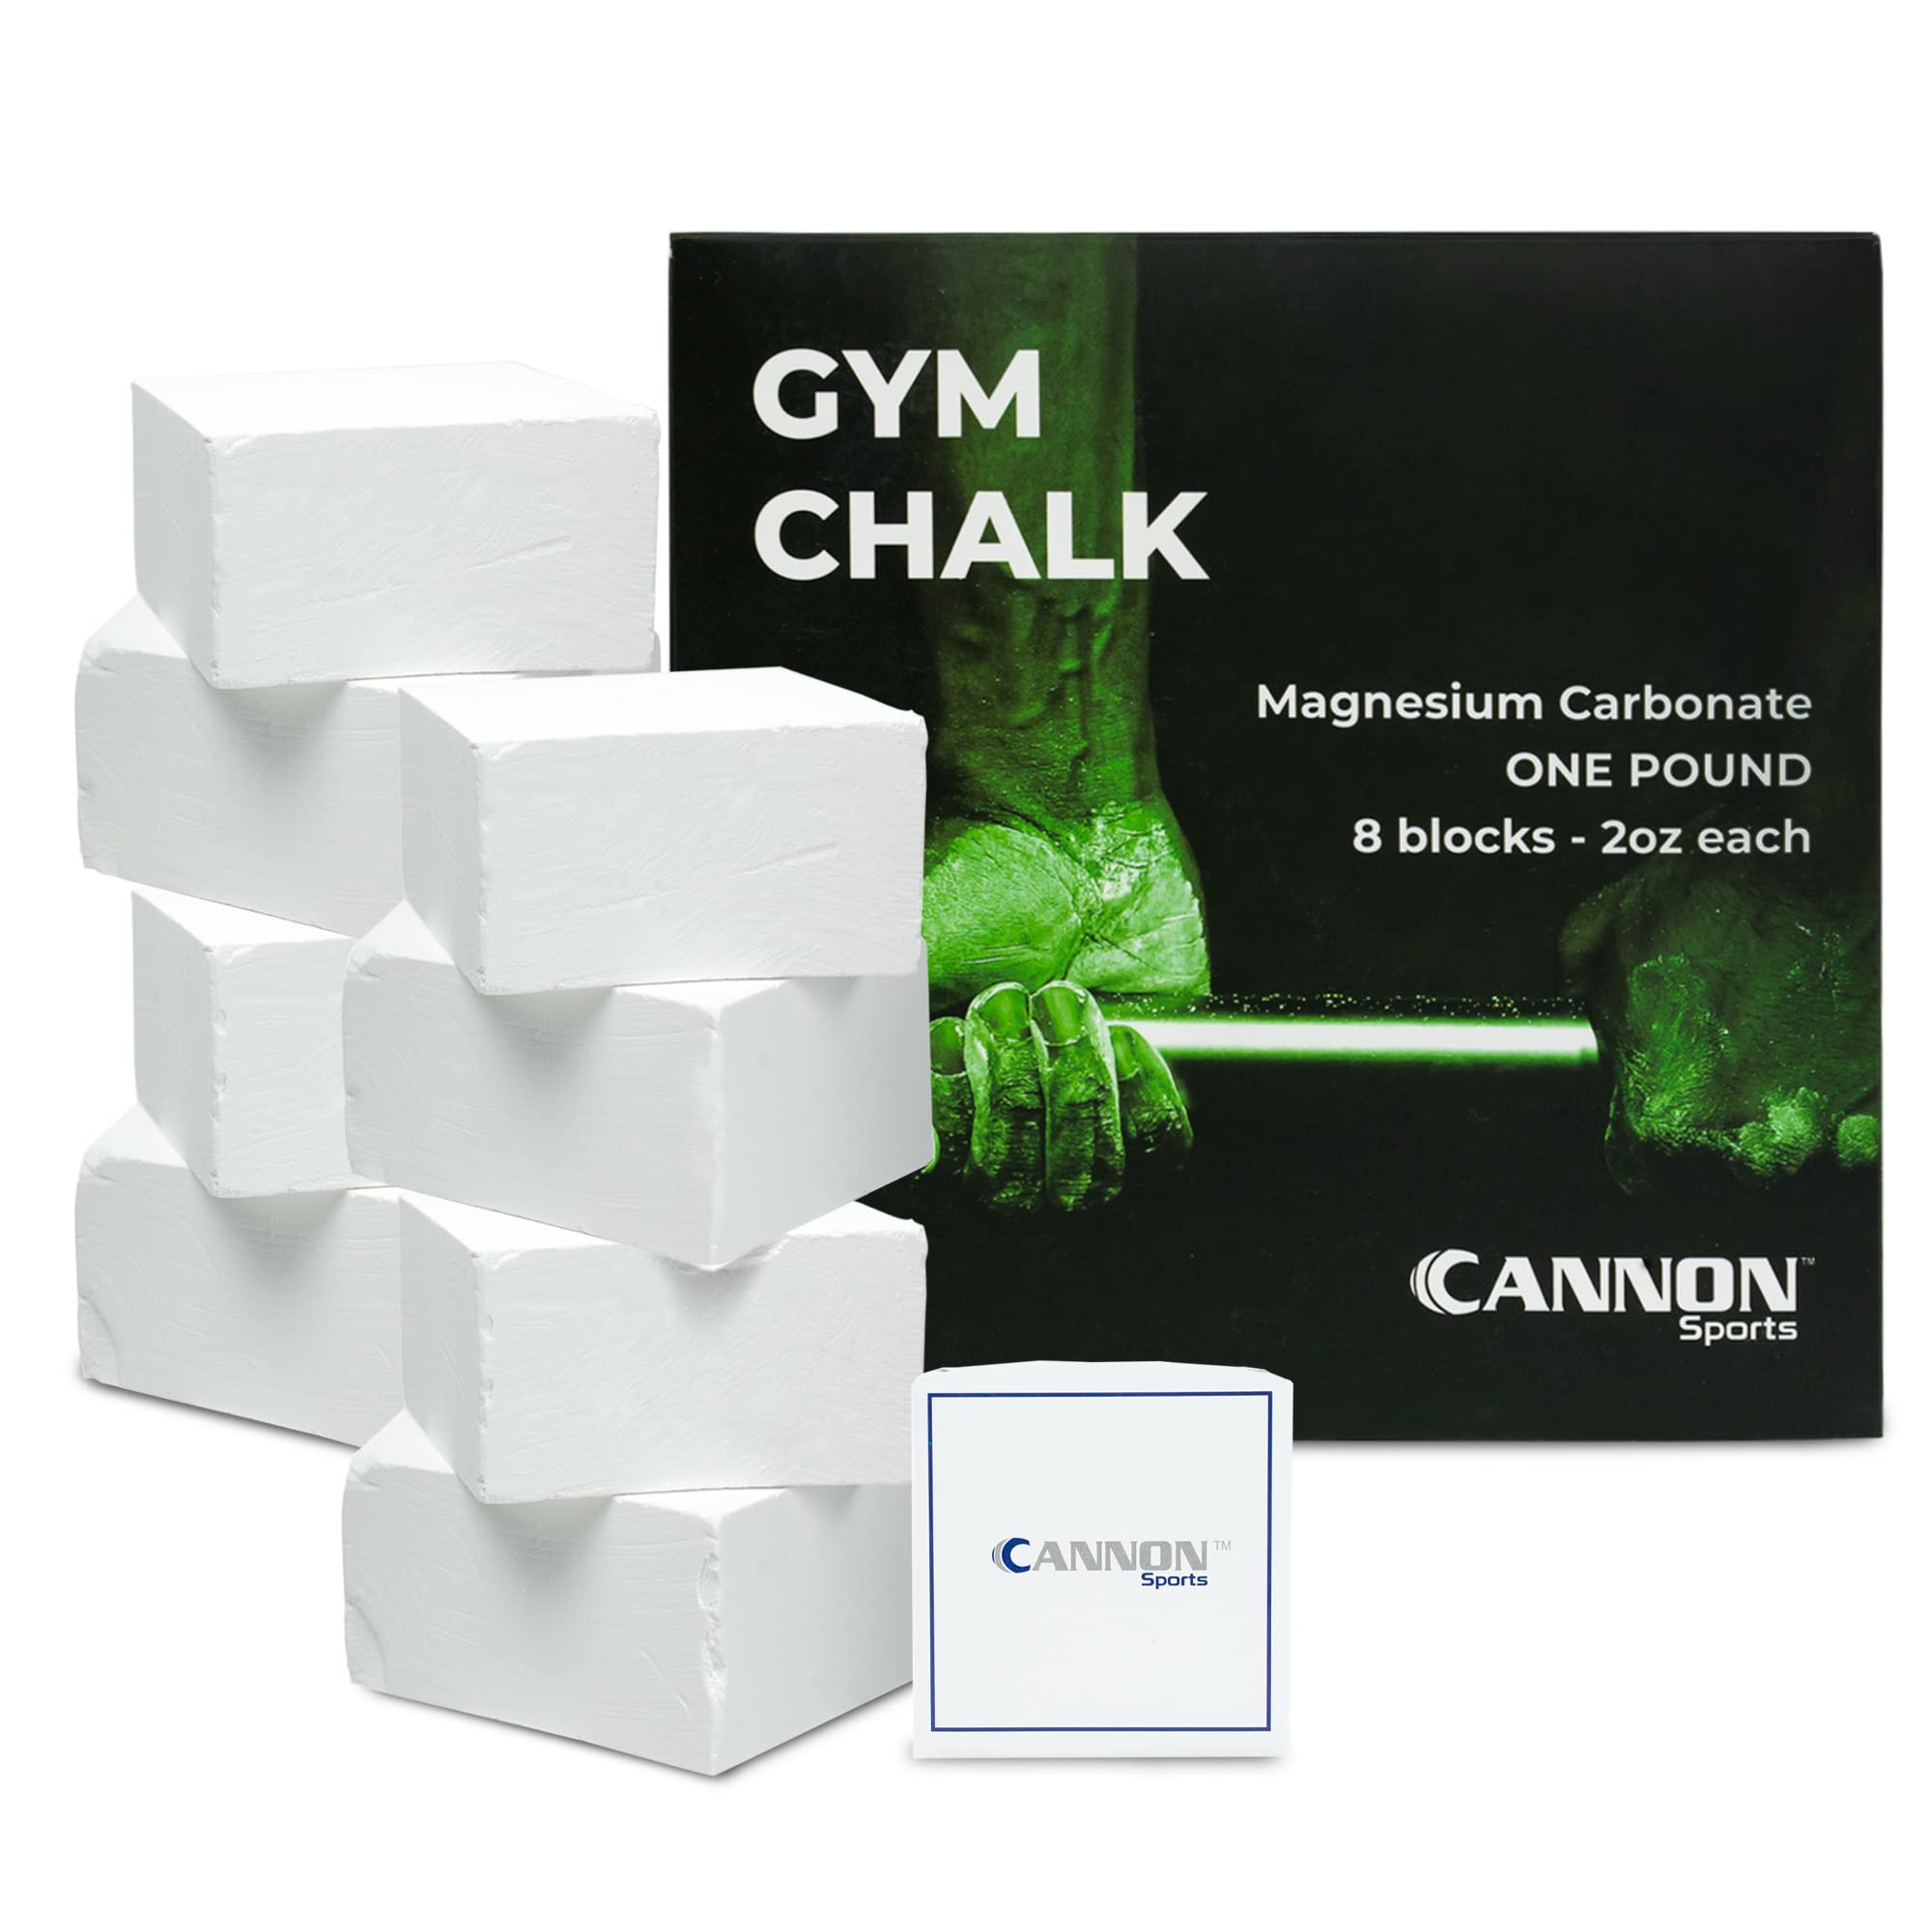 Dry Hand Chalk Block for Gyms Climbing Weightlifting Sports